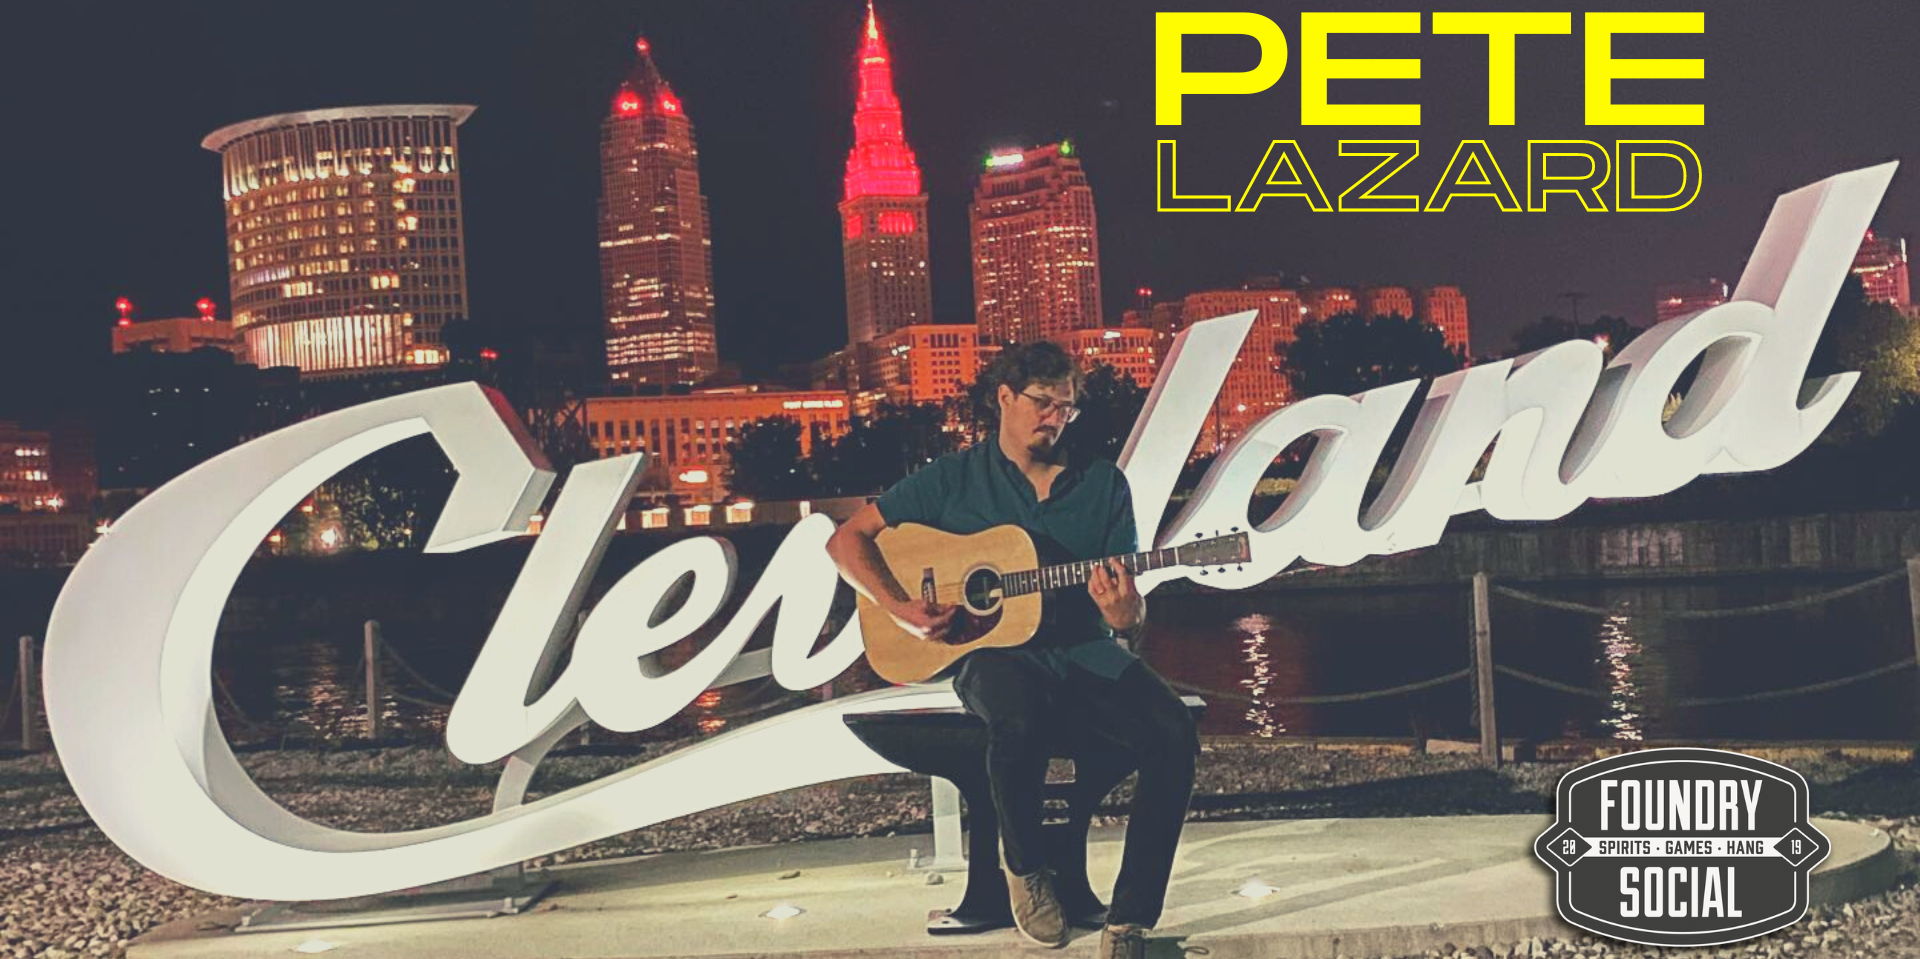 Pete Lazard LIVE at the Patio-Palooza Party promotional image